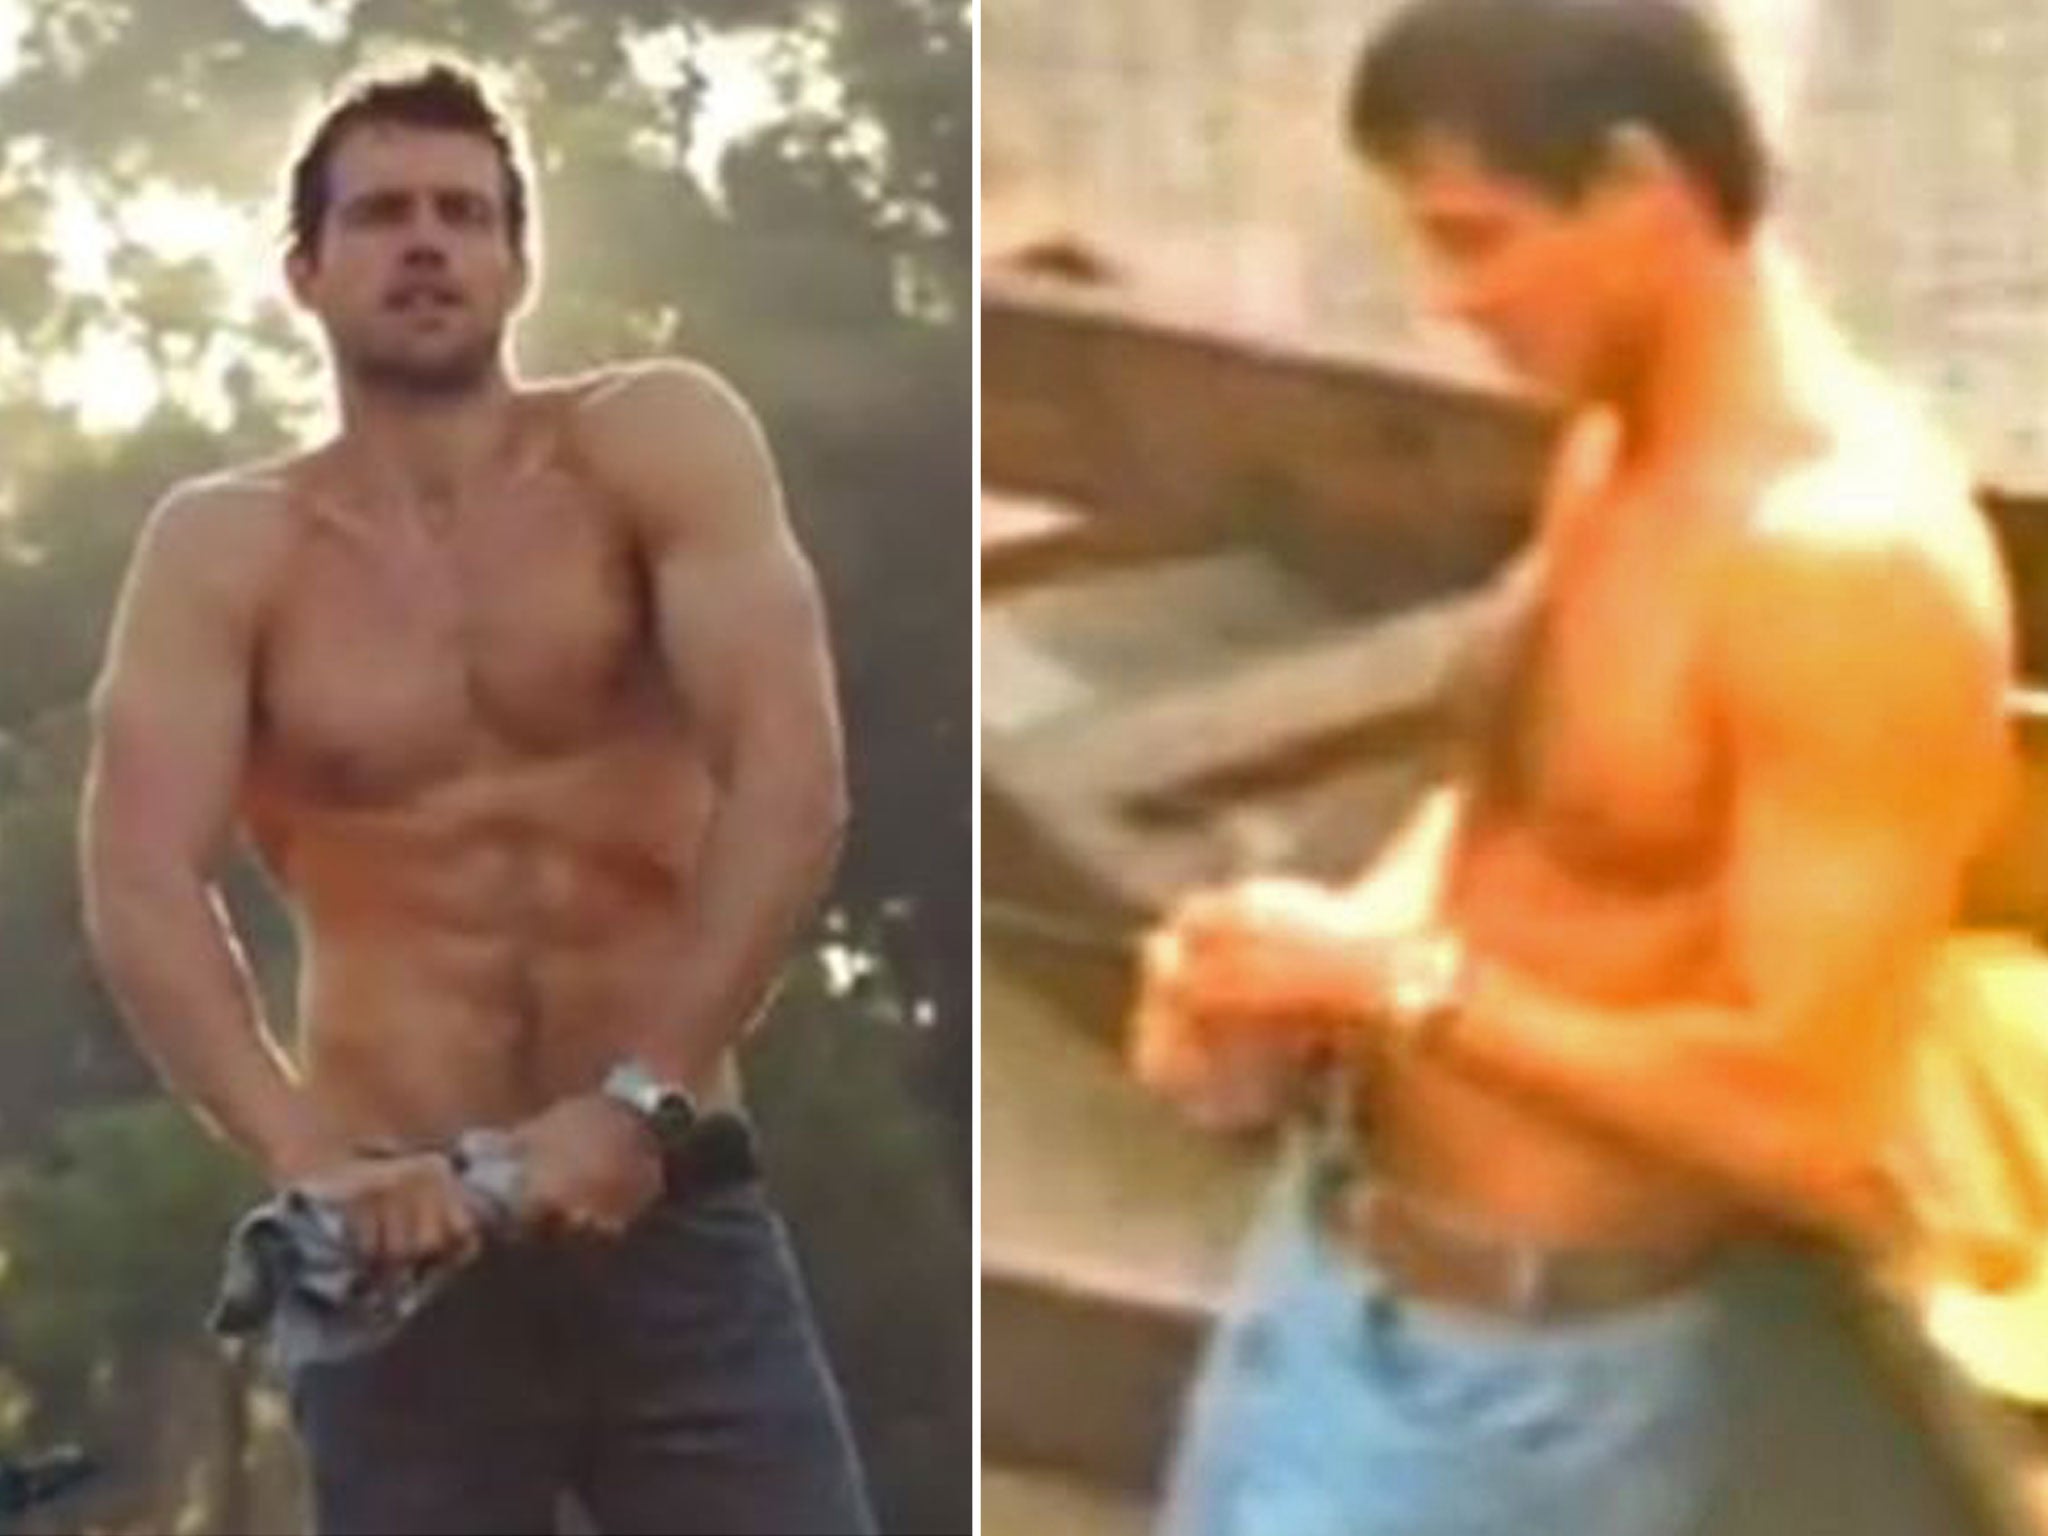 The diet coke man from 1994 (right) is back as a shirtless fit guy features in its latest ad (left)